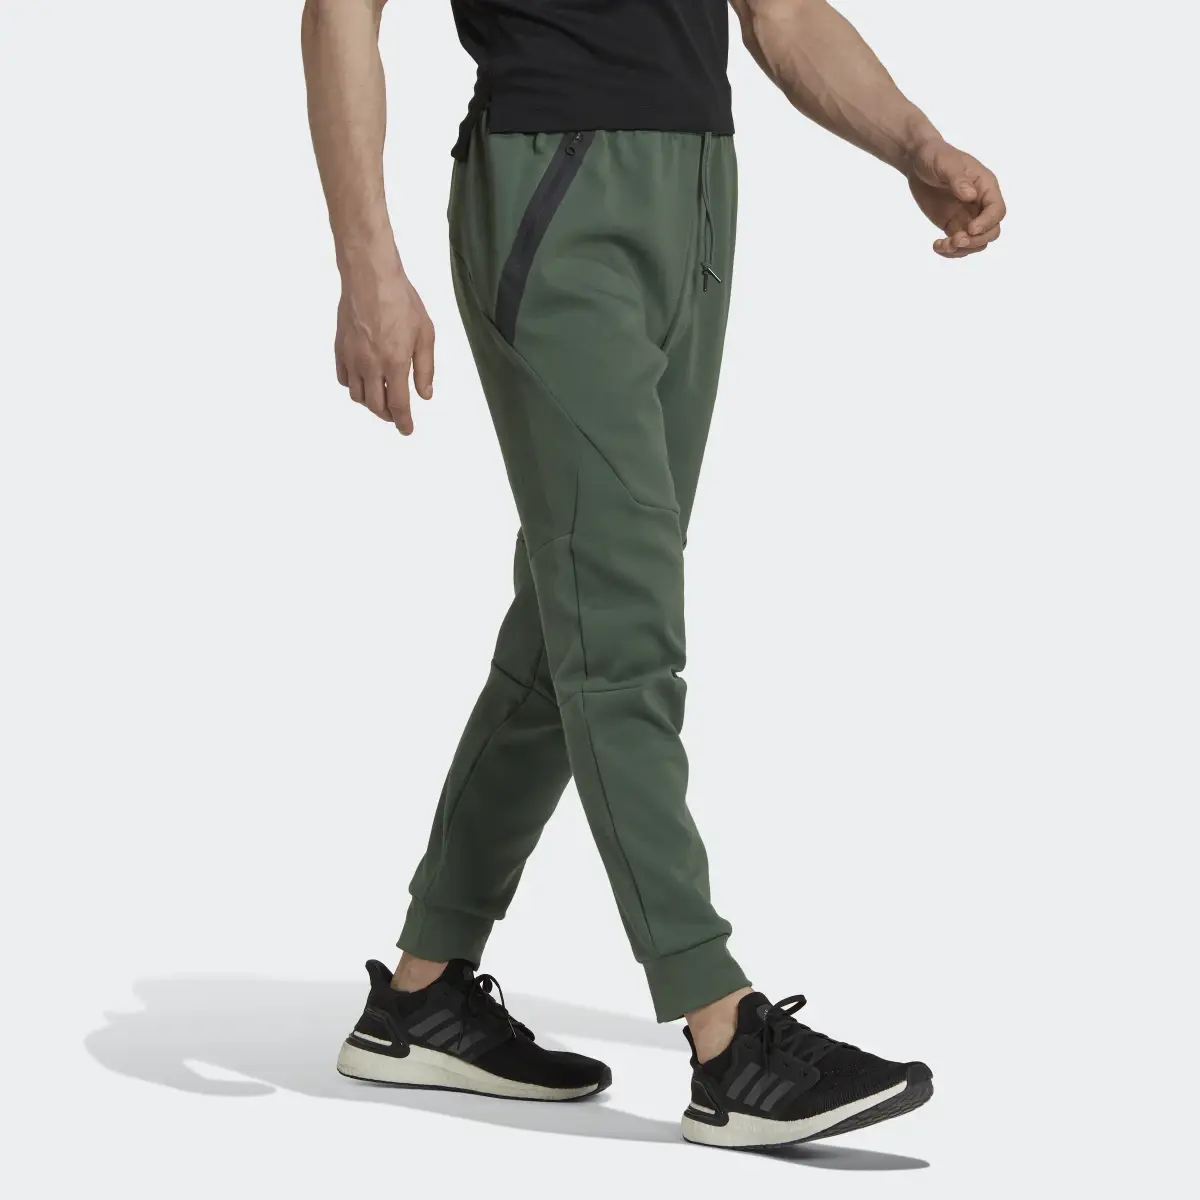 Adidas Designed for Gameday Joggers. 3